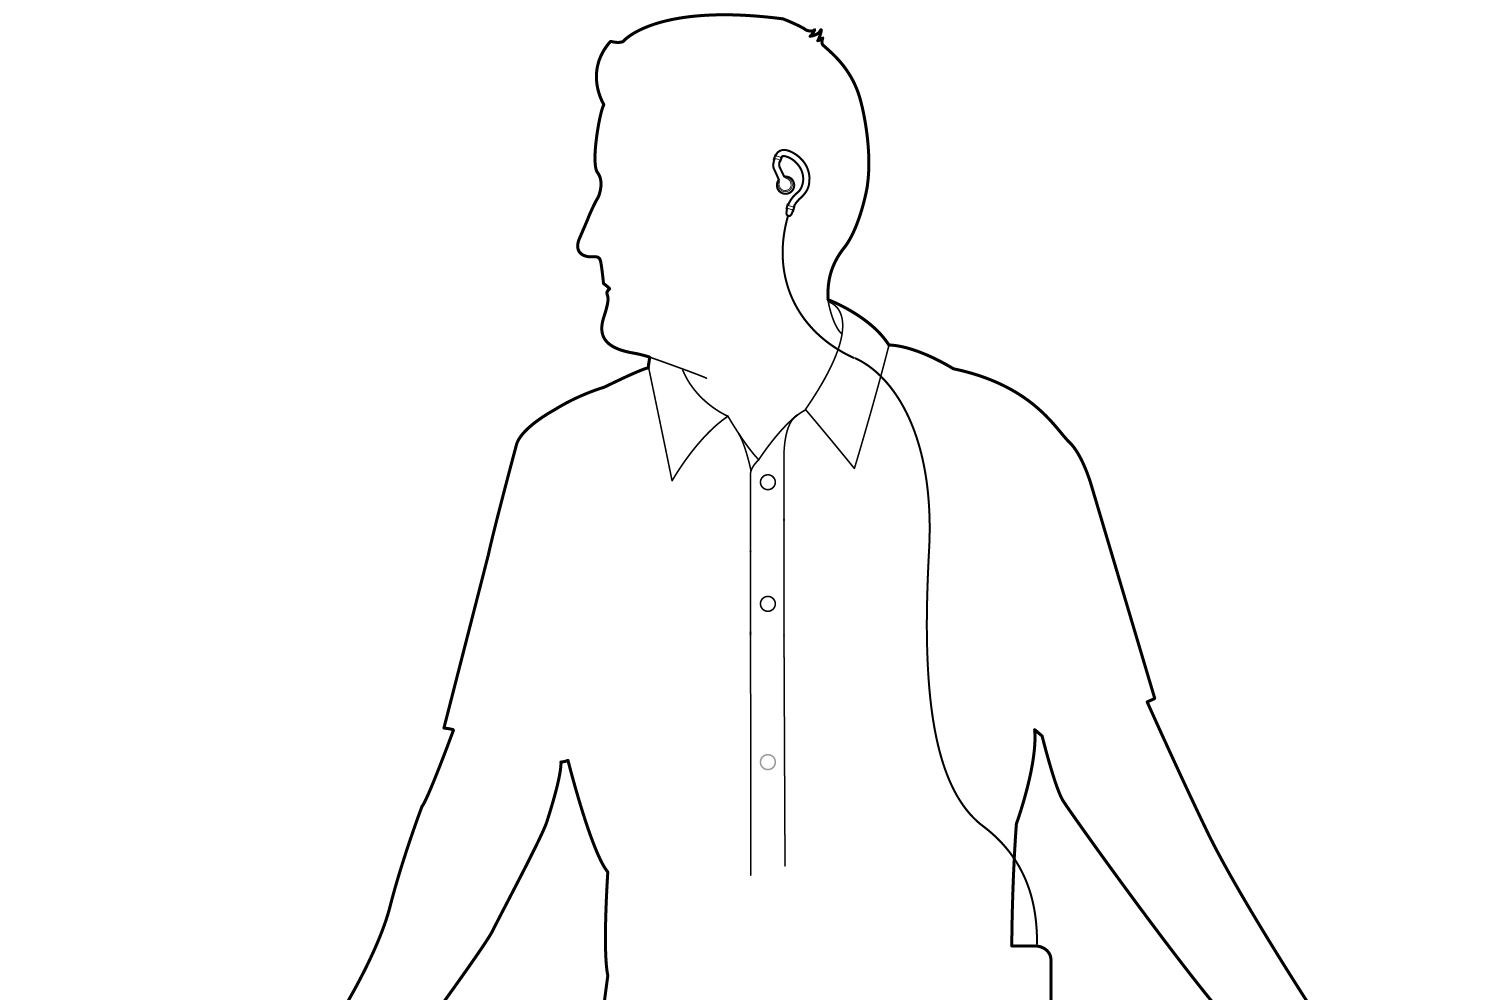 Wearing With Device on Belt Diagram